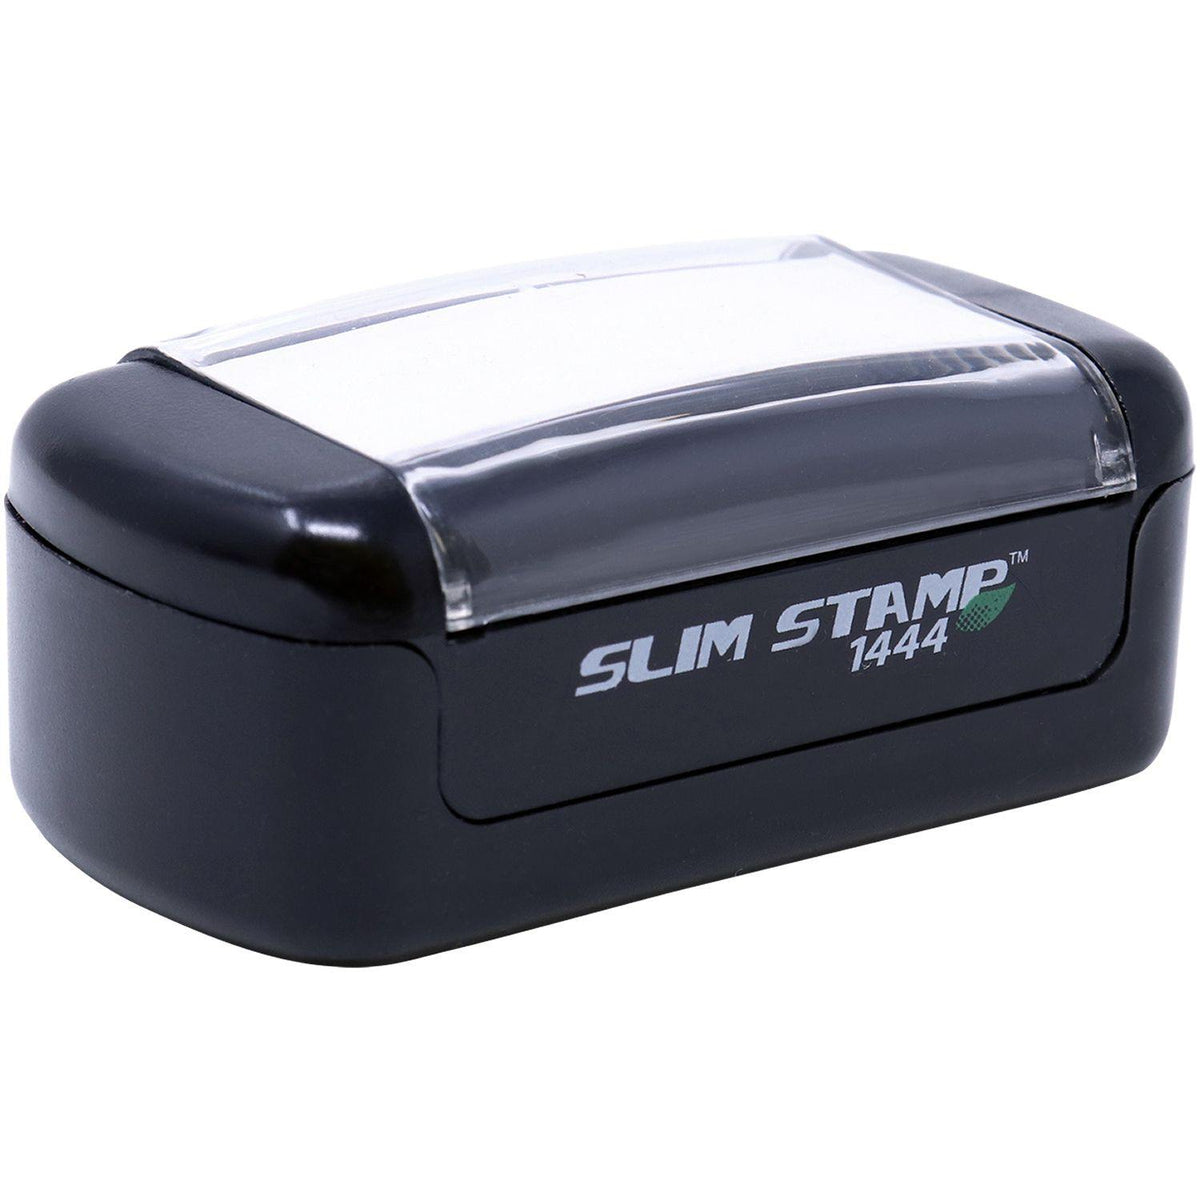 Slim Pre-Inked Billed with Date Box Stamp - Engineer Seal Stamps - Brand_Slim, Impression Size_Small, Stamp Type_Pre-Inked Stamp, Type of Use_Accounting, Type of Use_Finance, Type of Use_Office